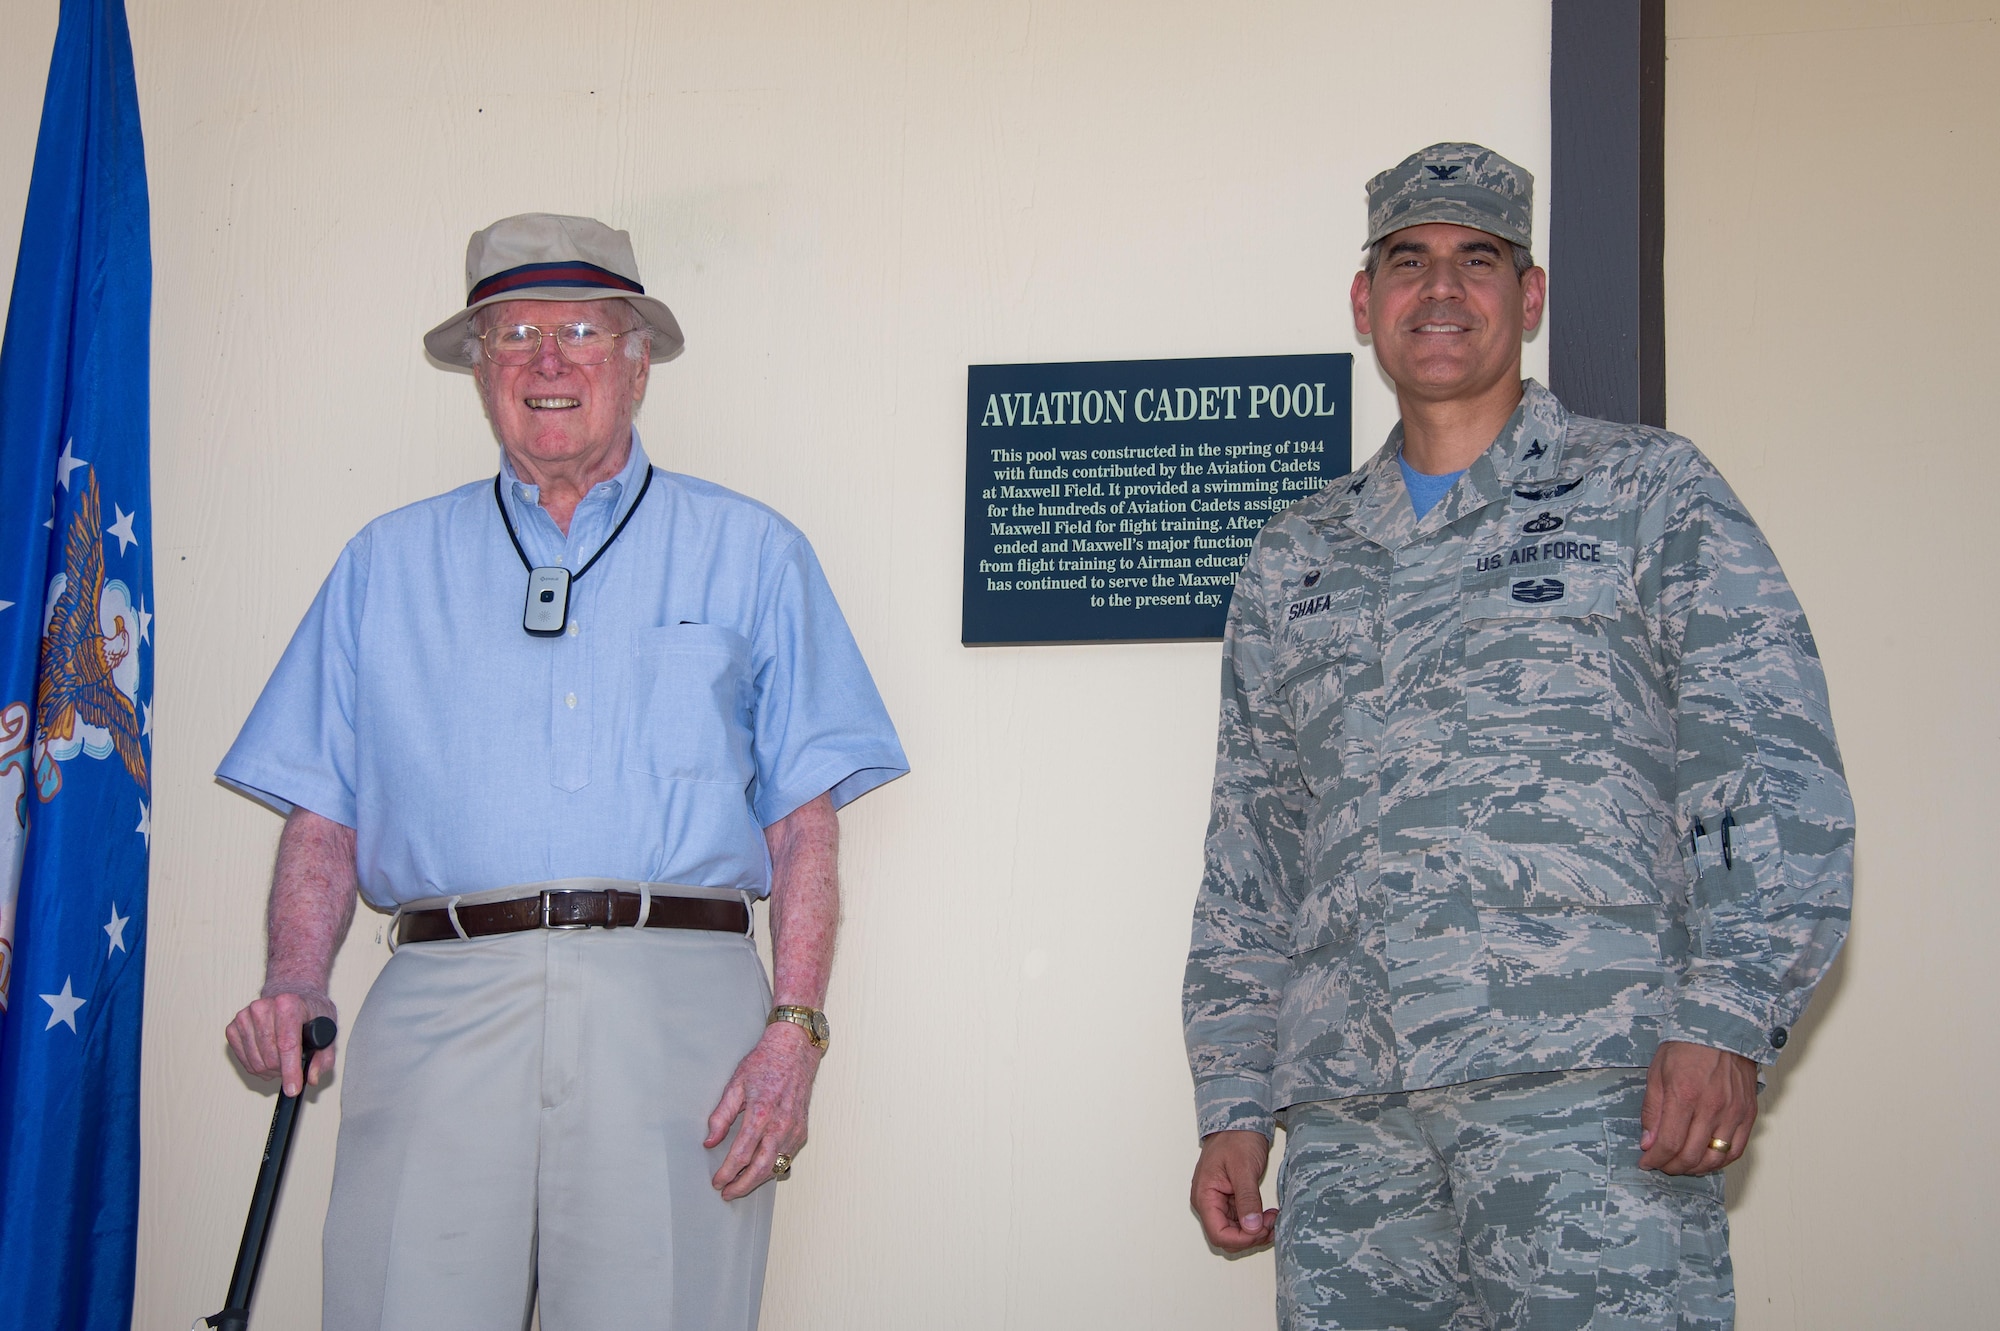 Col. Eric Shafa, 42nd Air Base Wing Commander, and reitred Col. William Quinn, former aviation cadet at Maxwell Air Force Base, Ala., renames the Maxwell Community Pool as the Aviation Cadet Pool, June 9, 2017. The pool was constructed in  1944 with funds contributed by the Aviation Cadets at Maxwell Field. It provided a swimming facility for the hundreds of Aviation Cadets assigned to Maxwell Field for flight training.  (US Air Force photo by Melanie Rodgers Cox)